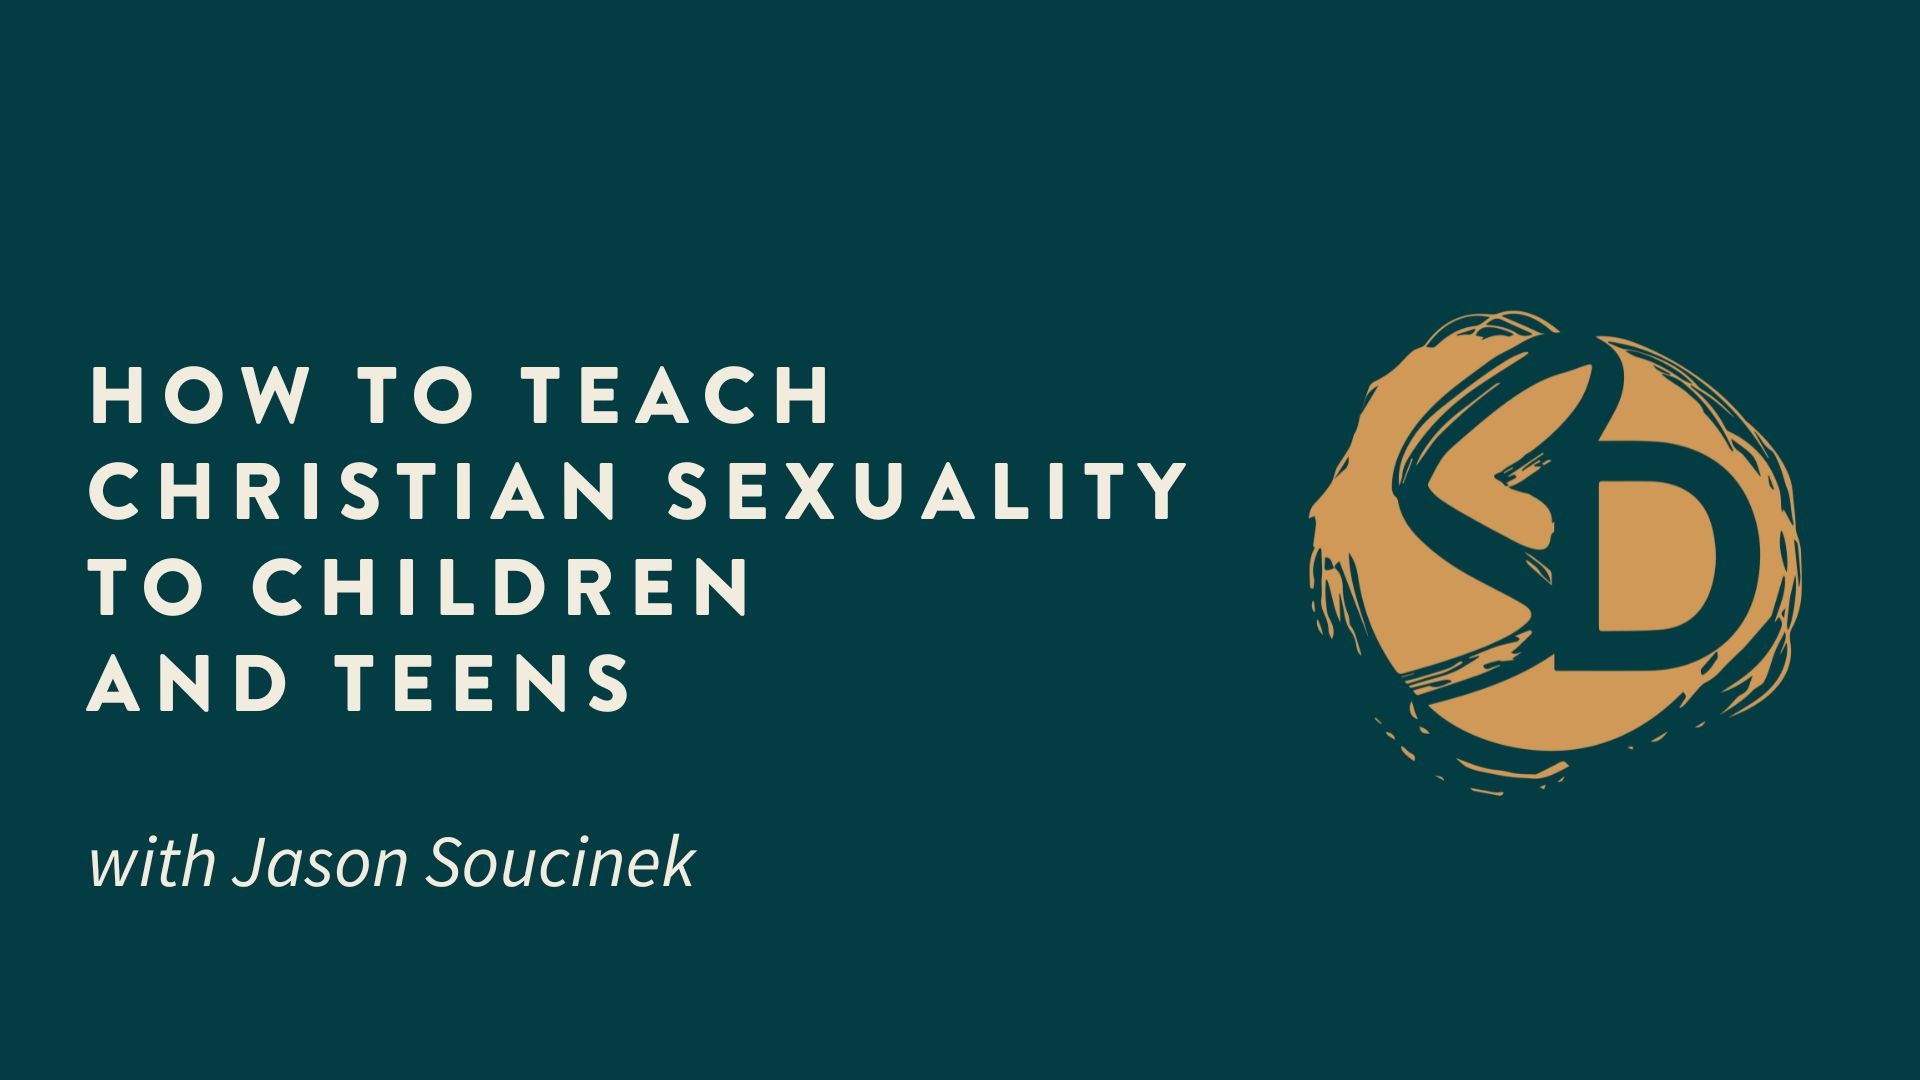 How To Teach Christian Sexuality to Children and Teens